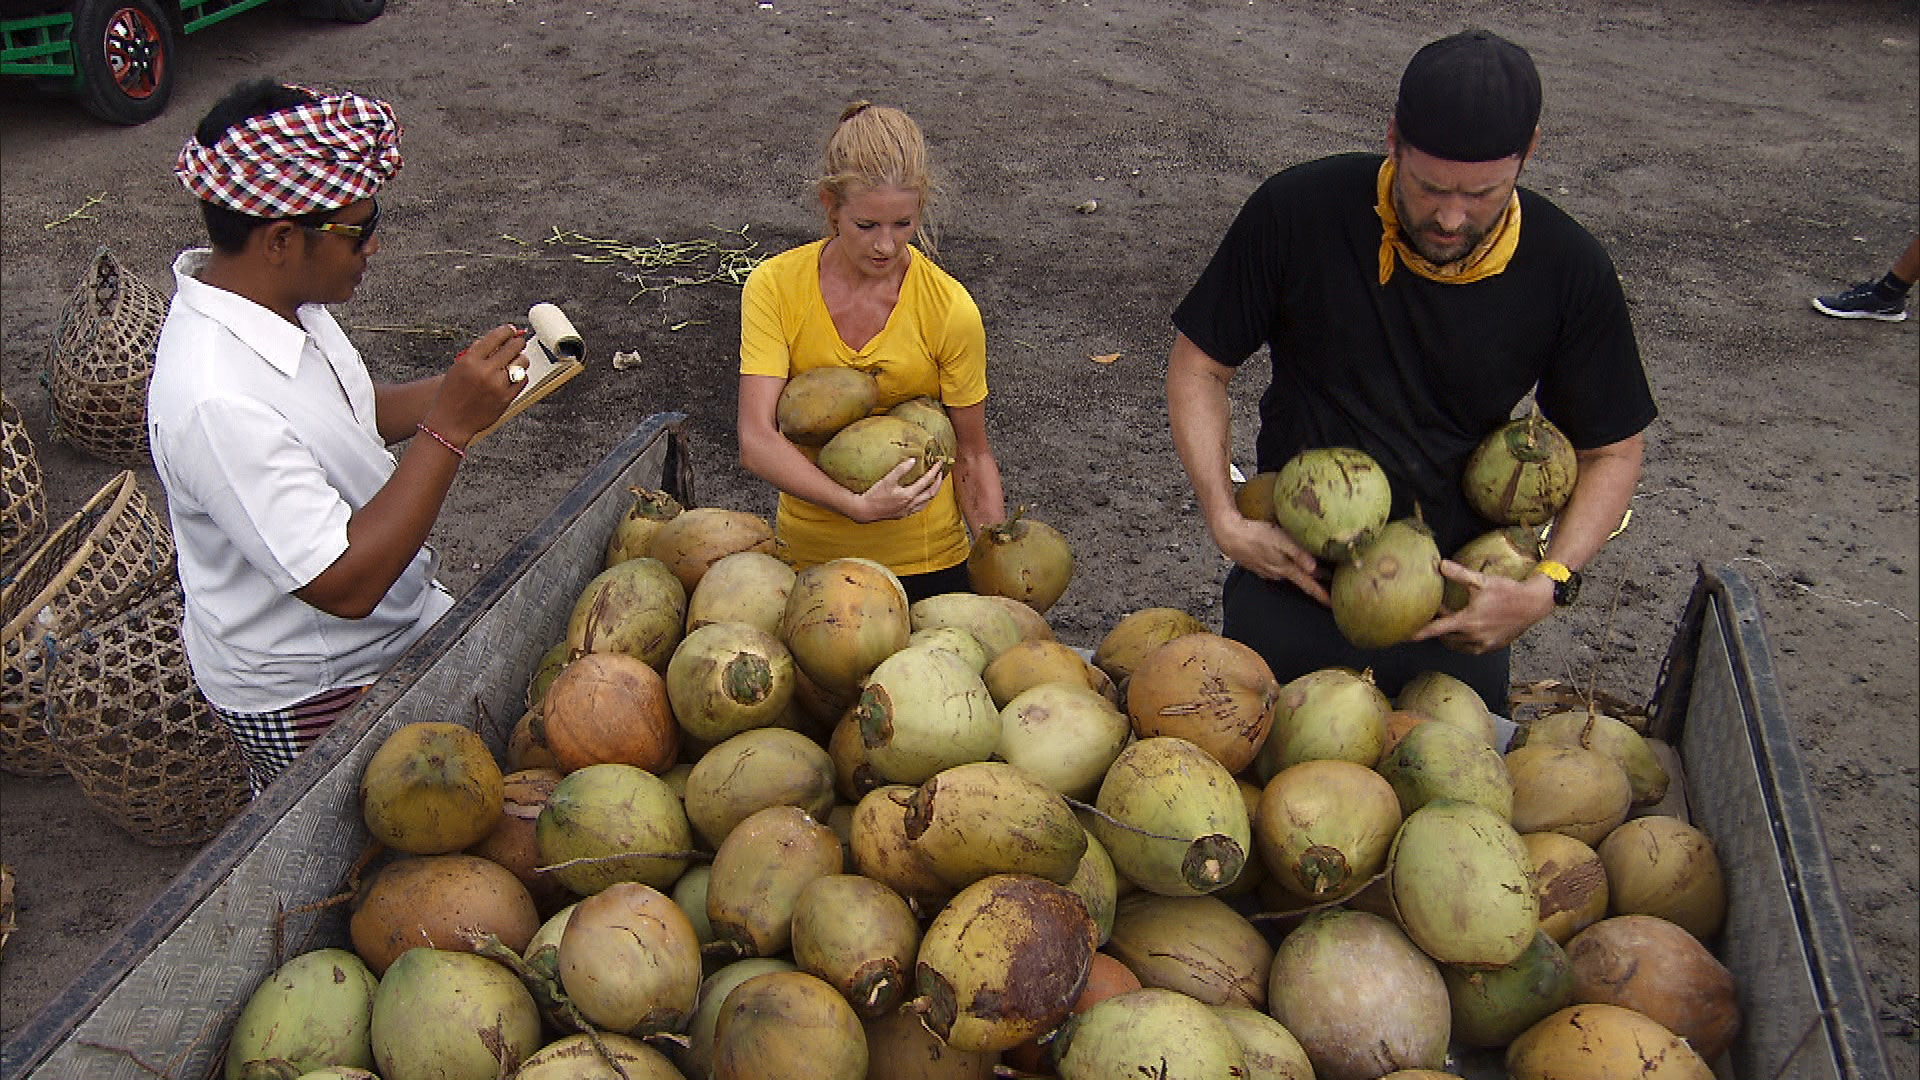 At Detour A, Ashley and Burnie are tasked with carrying 50 coconuts.